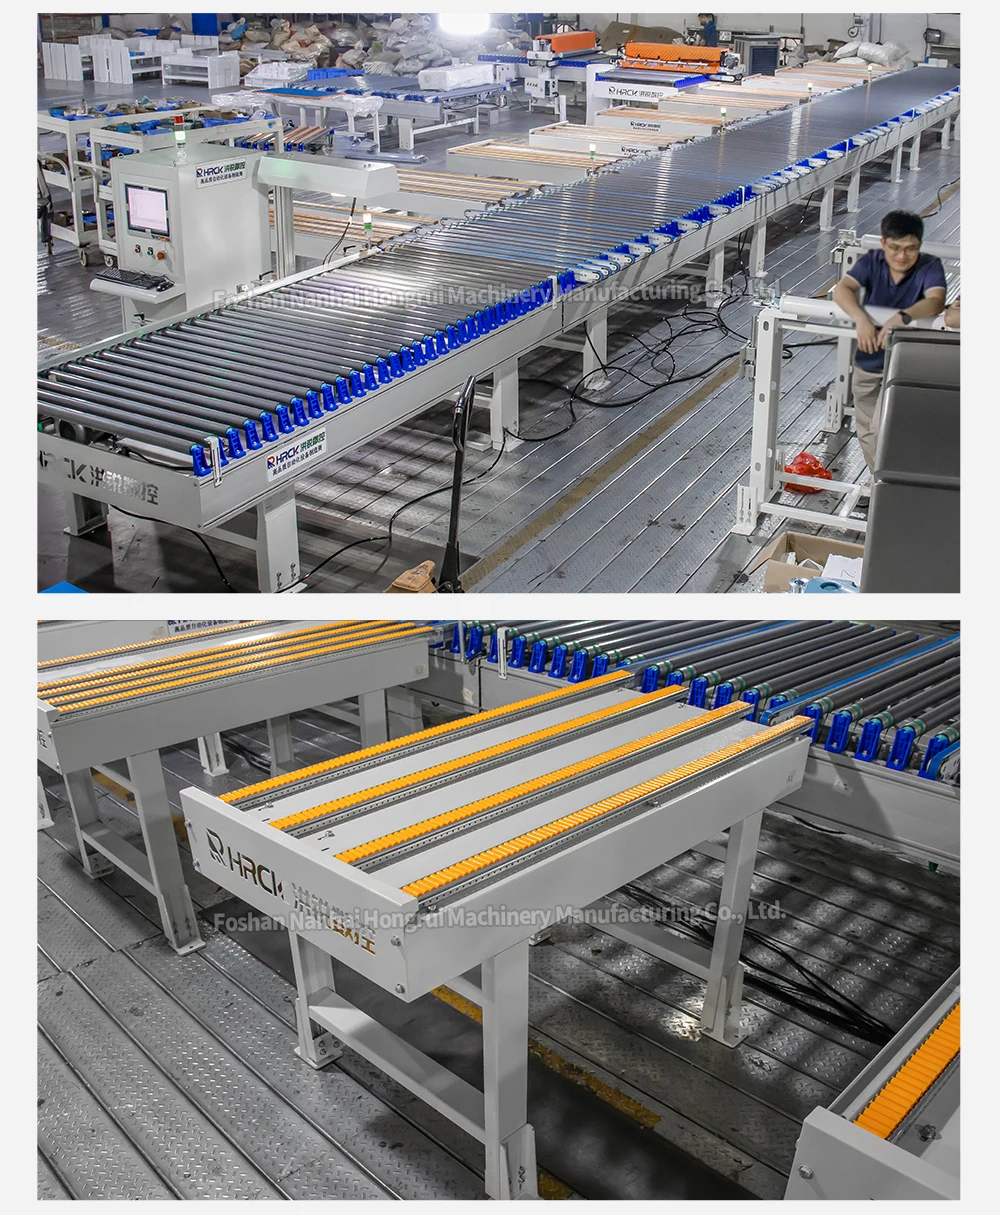 Intelligent unmanned machine operation of wooden boards packaging production line manufacture